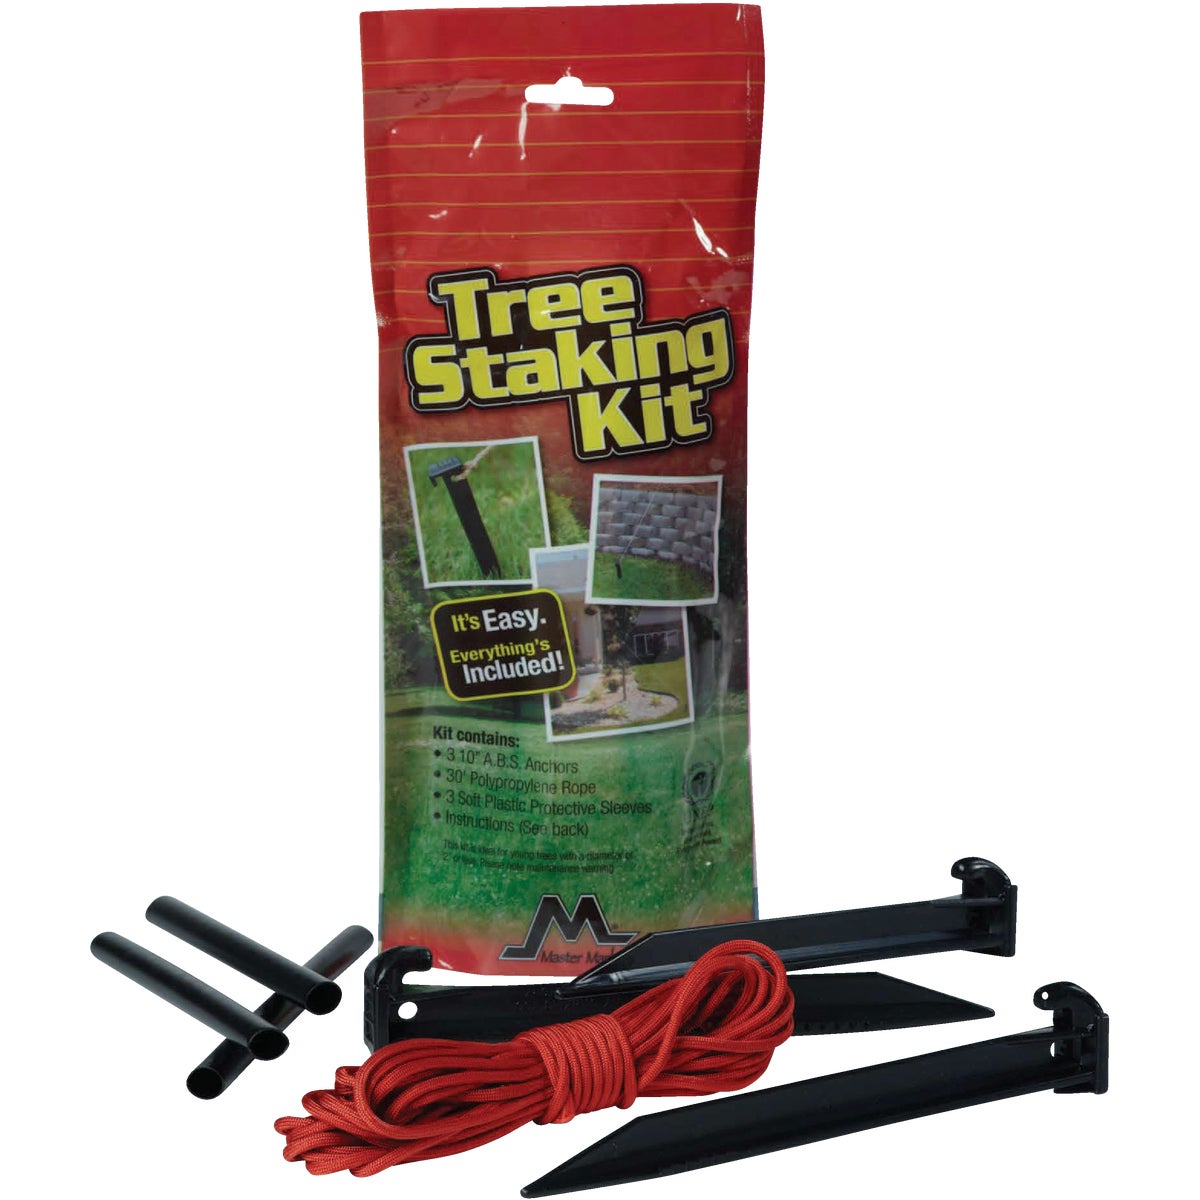 Item 703523, Tree stake kit. Includes stakes, protective sleeve, and rope.